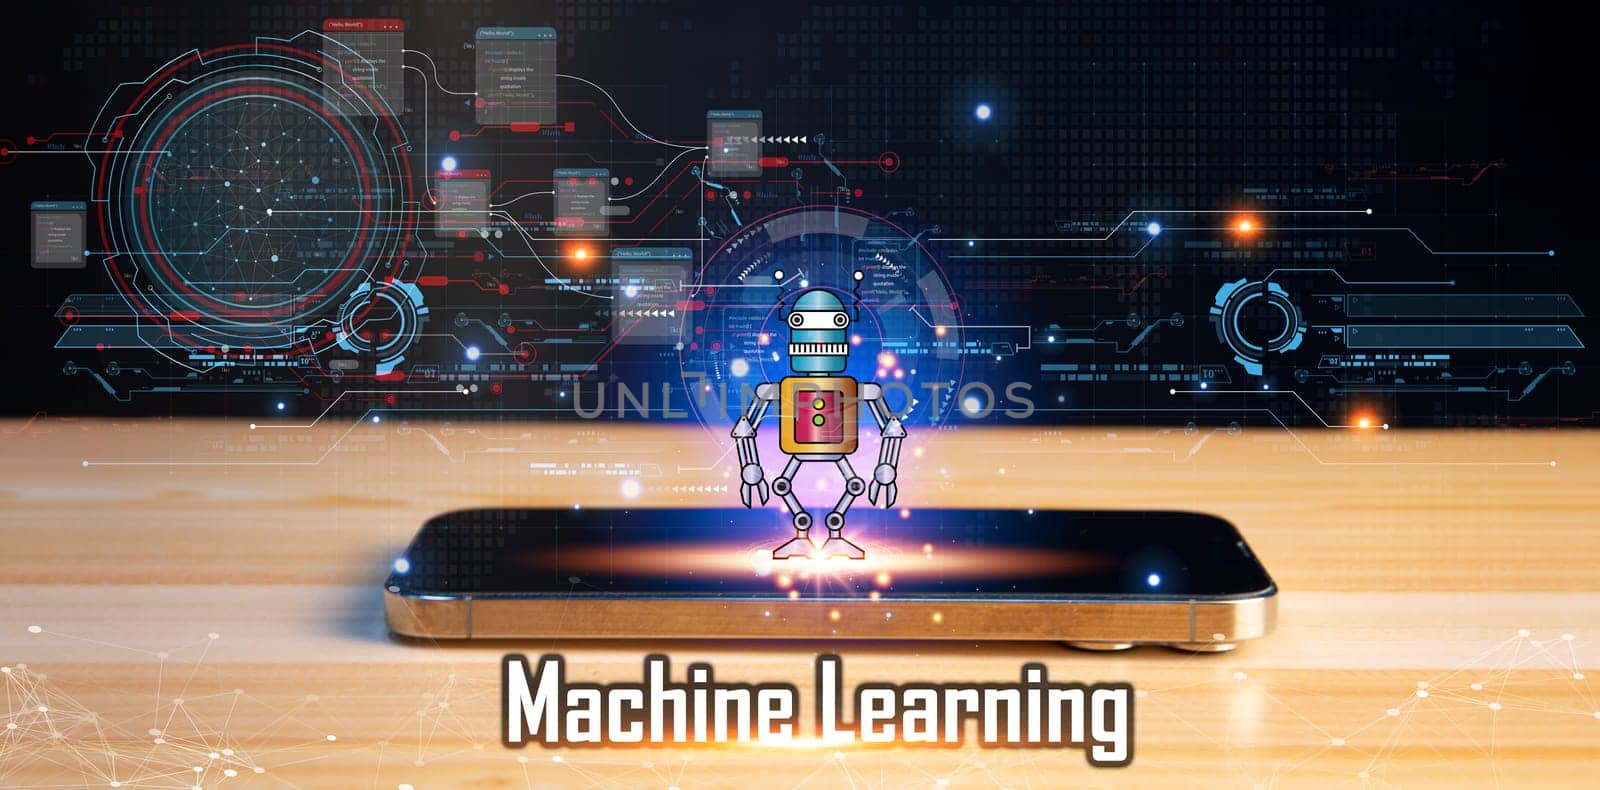 The concept of Machine Learning is to allow computer systems to learn by themselves. By virtue of entering data